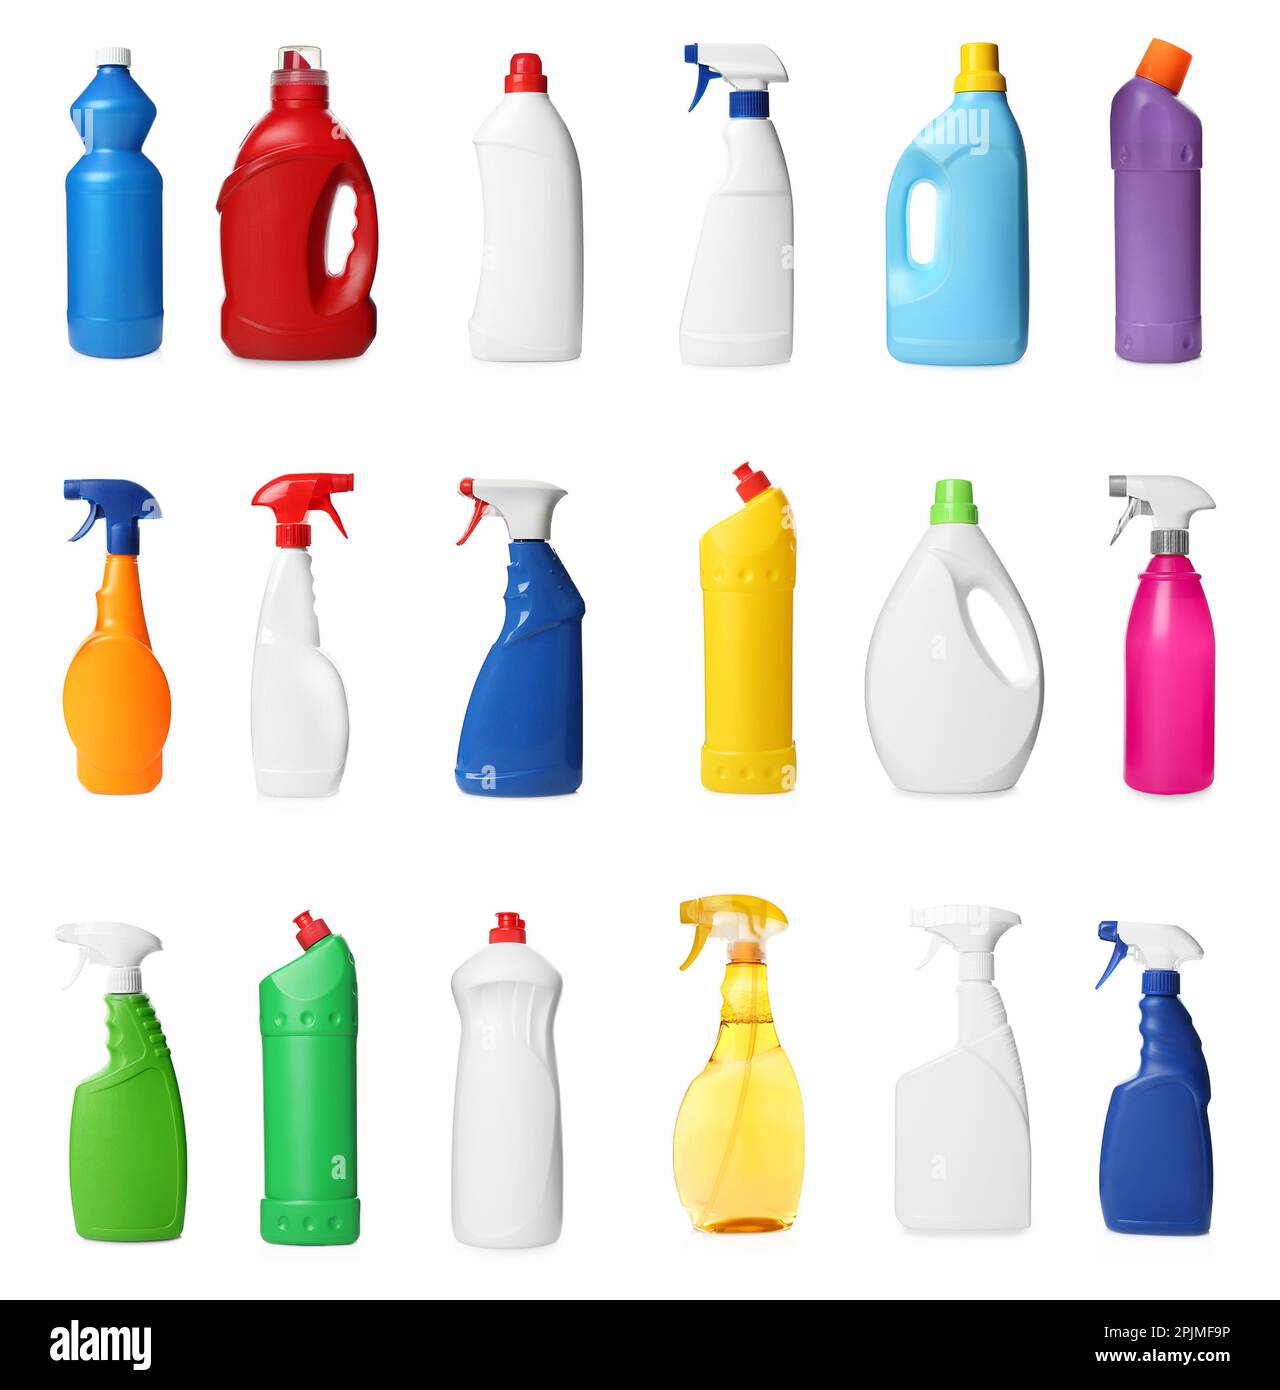 https://c8.alamy.com/comp/2PJMF9P/set-with-different-cleaning-products-on-white-background-2PJMF9P.jpg